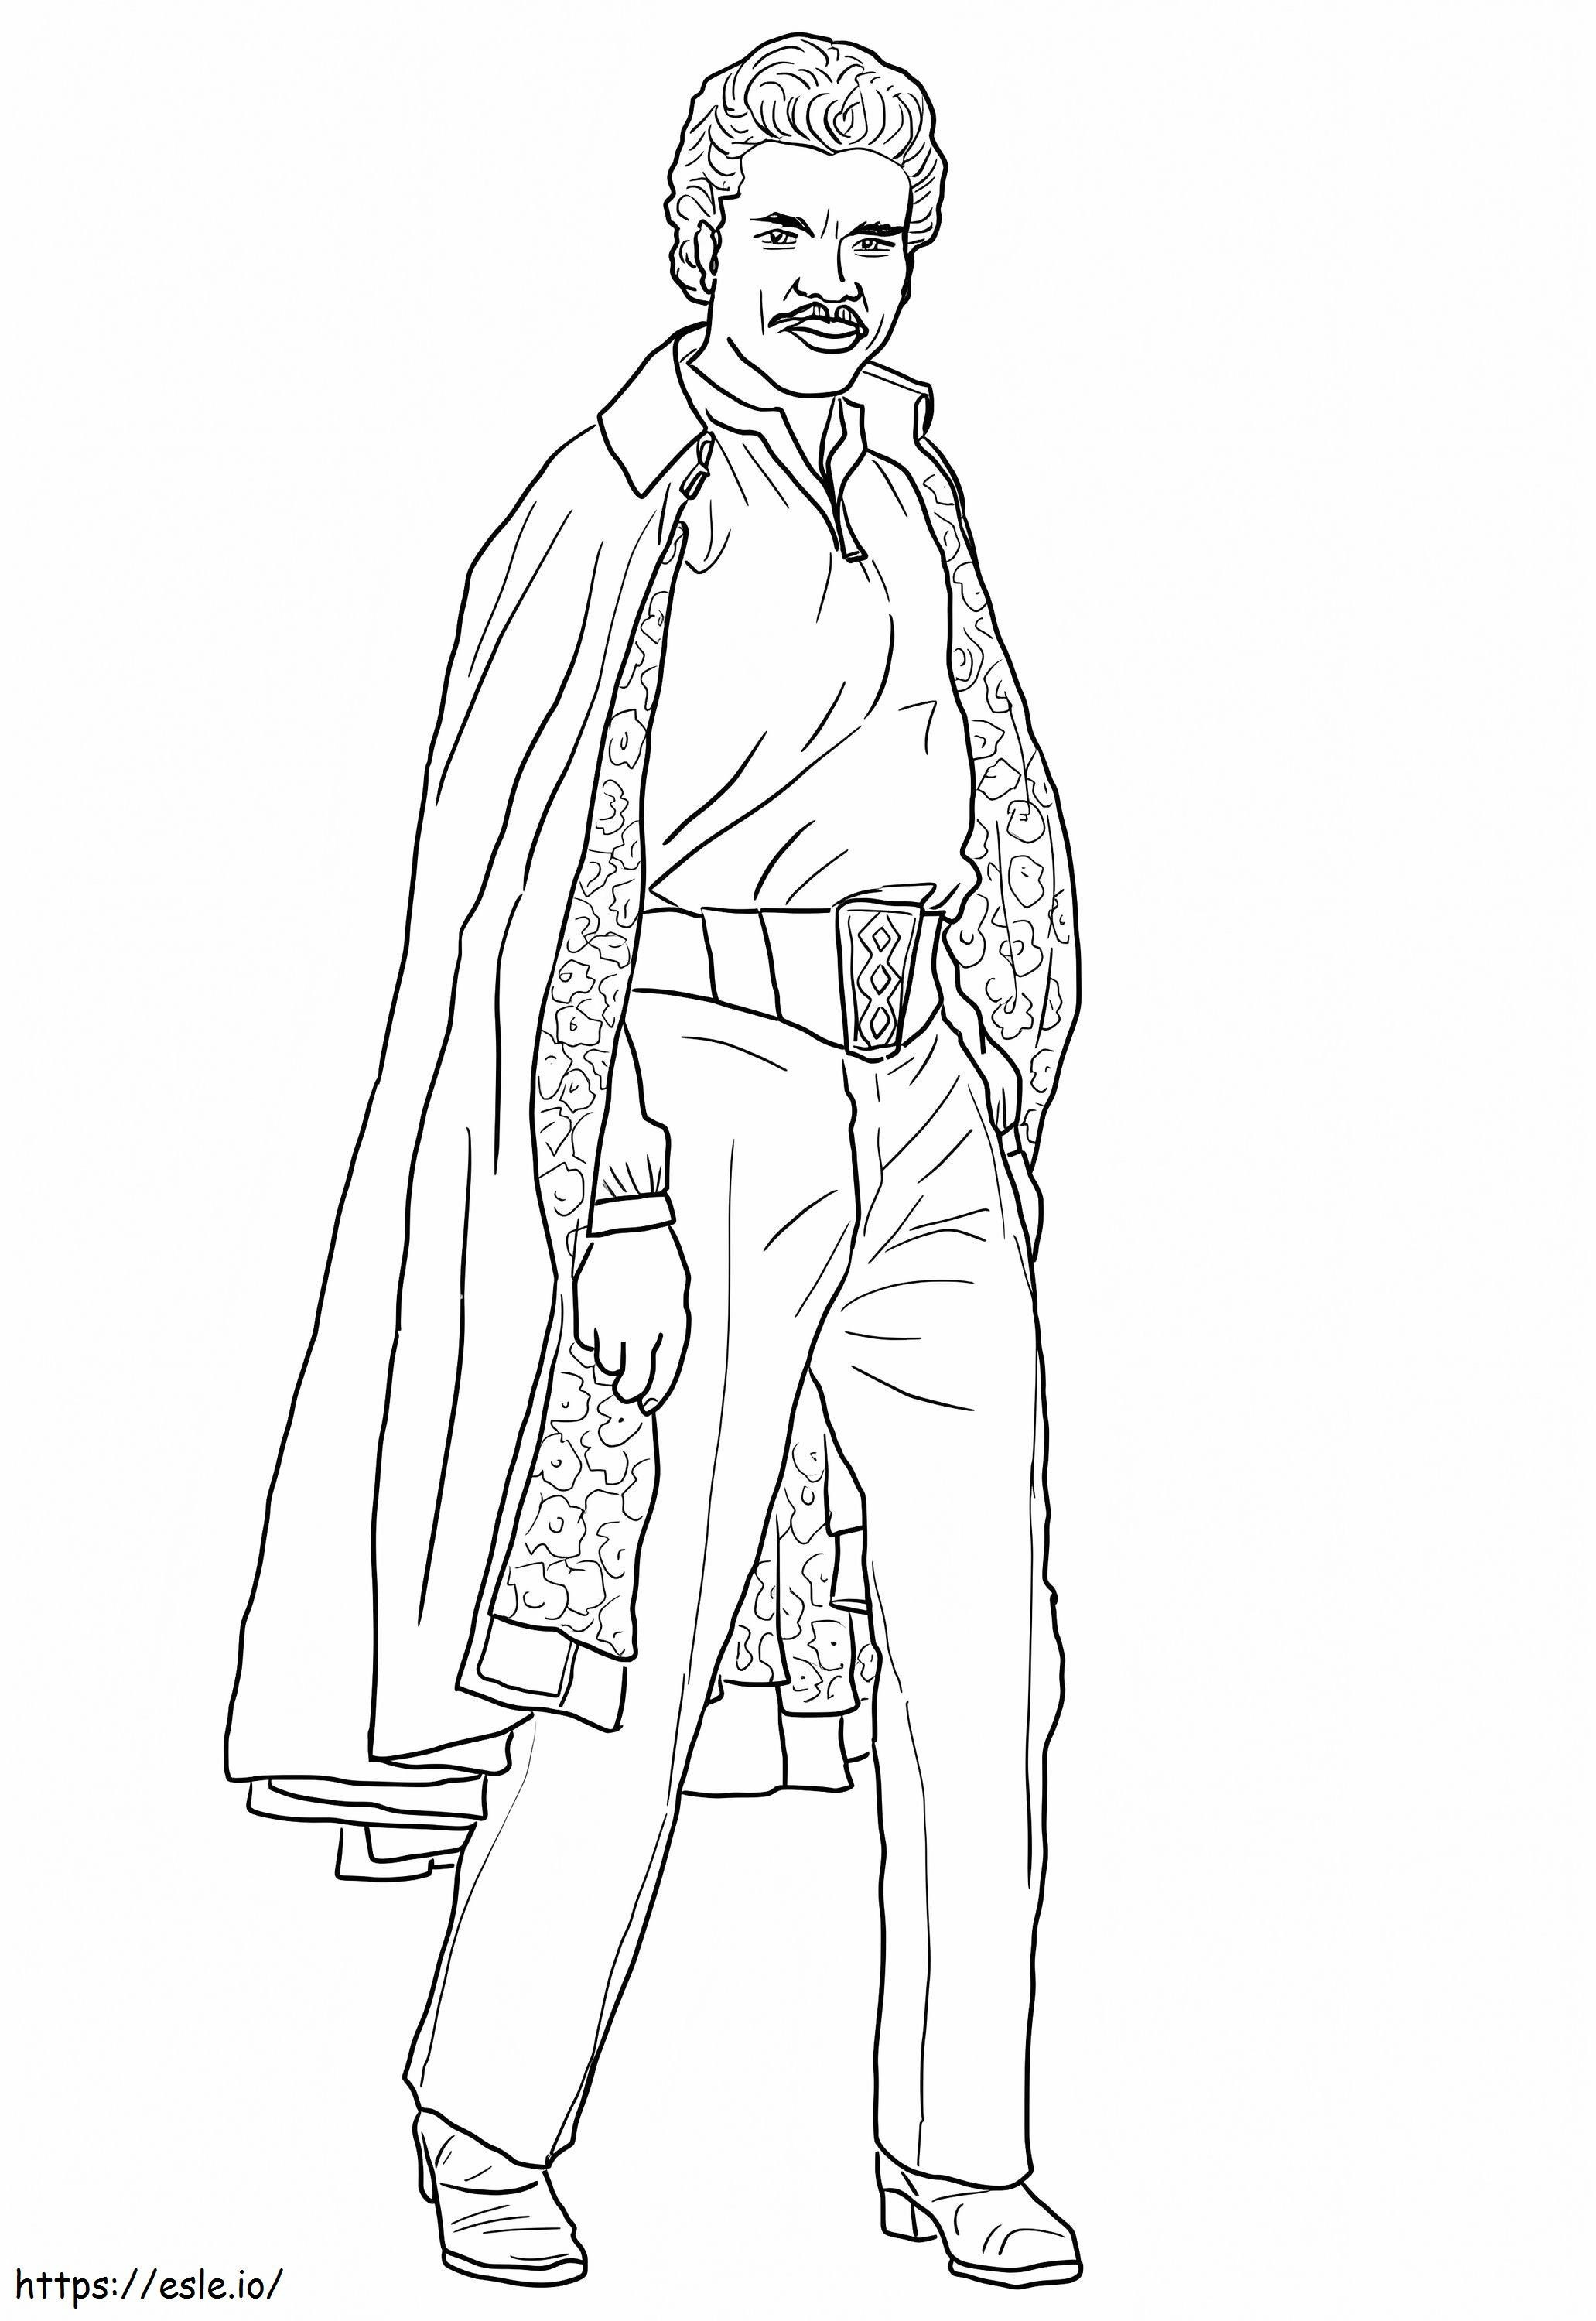 Lando Calrissia From Star Wars 704X1024 coloring page